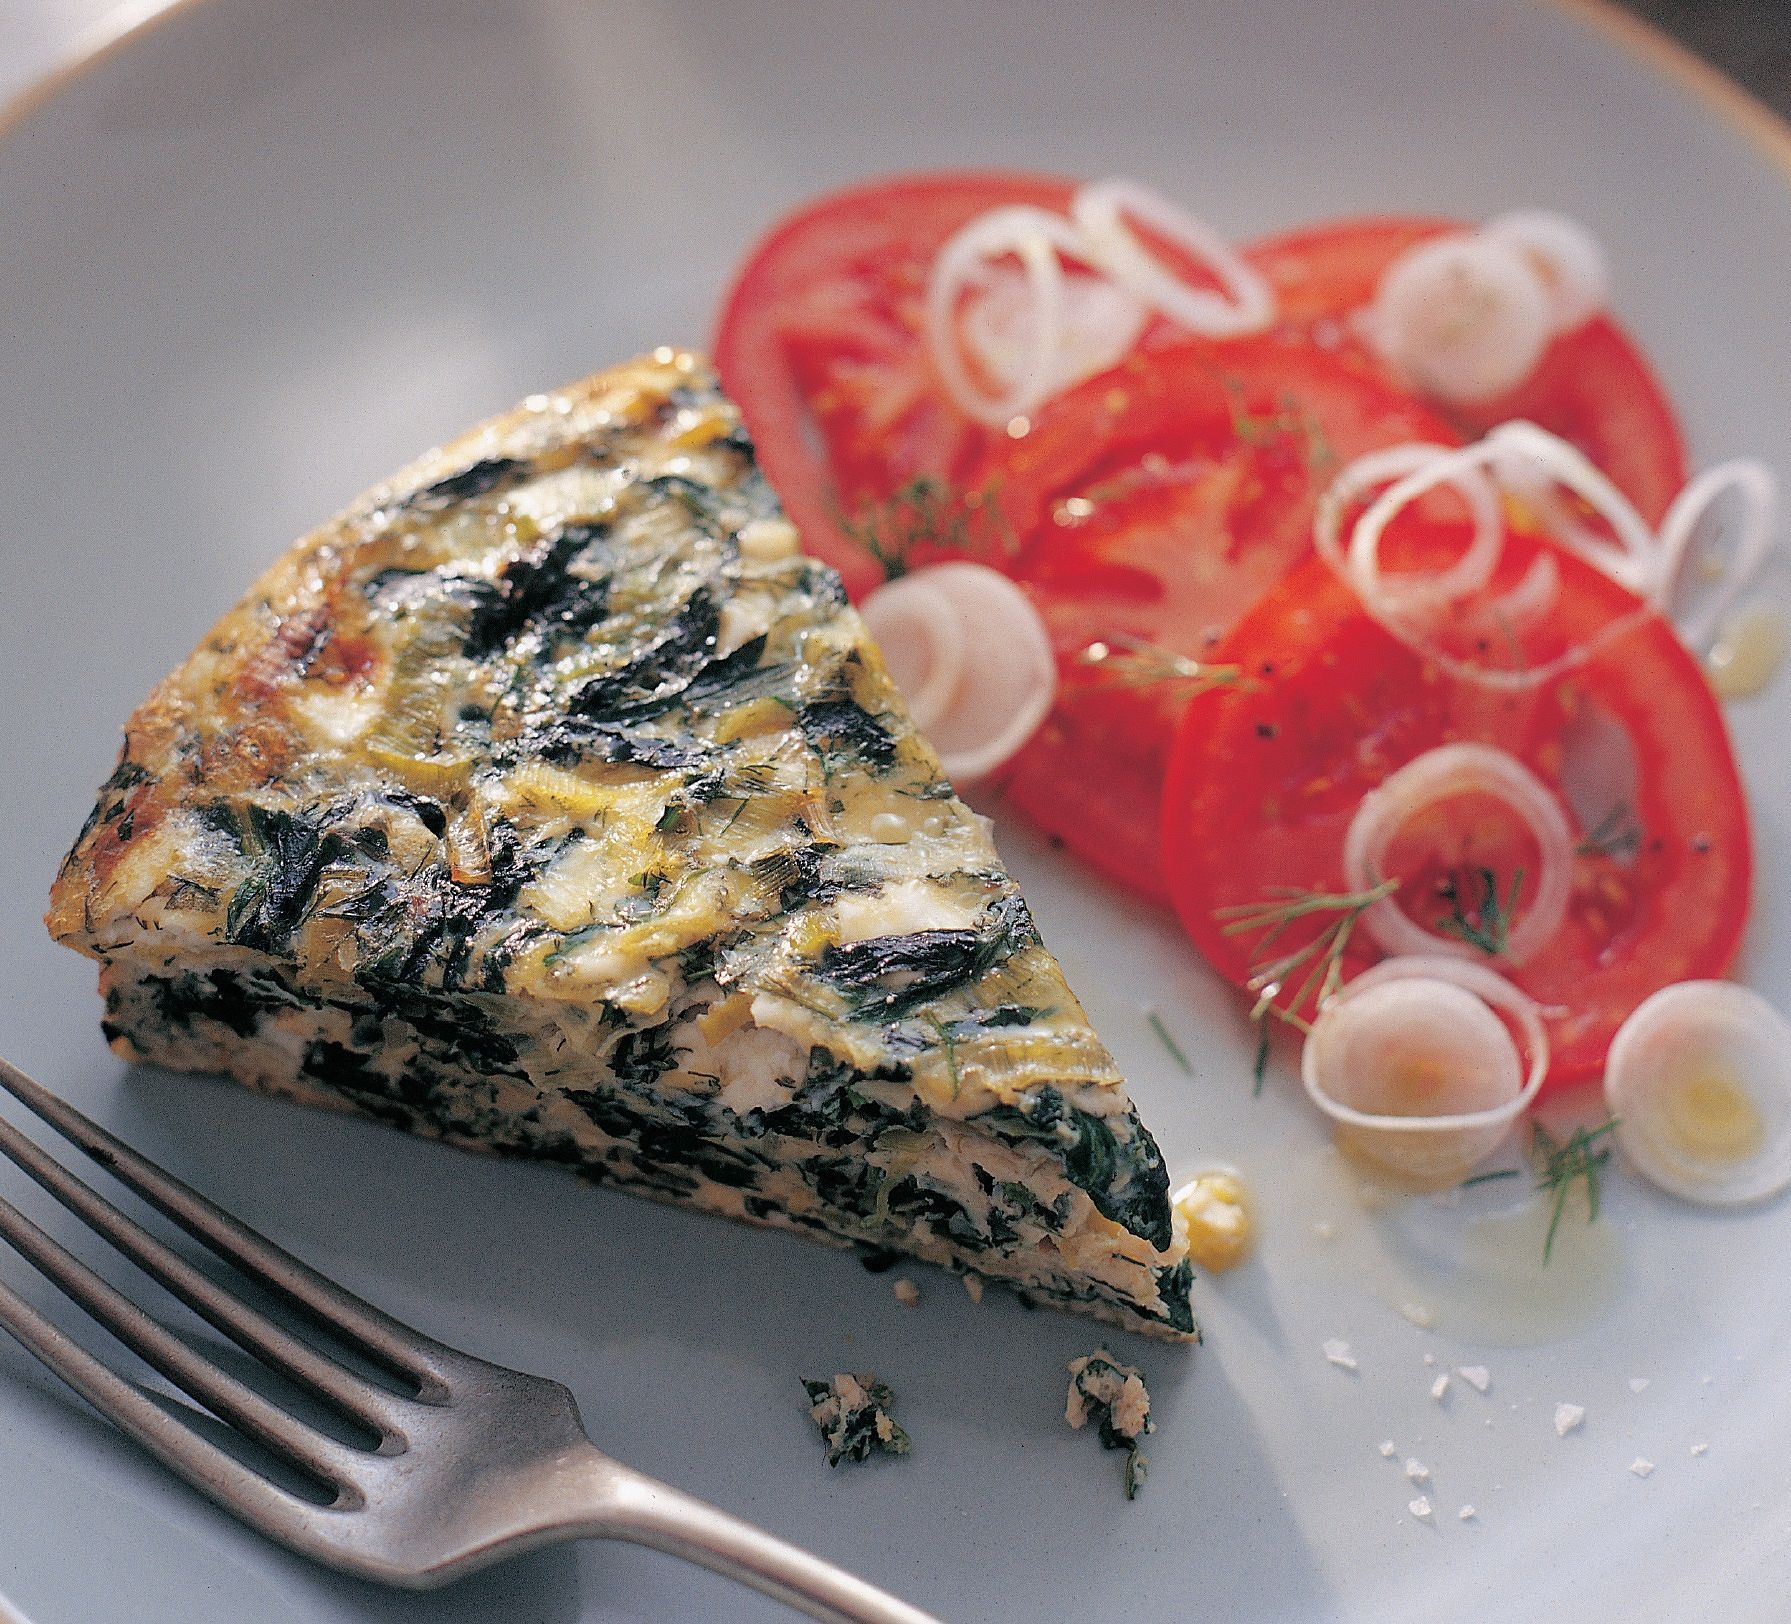 Baked Greek Omelette with Wild Greens